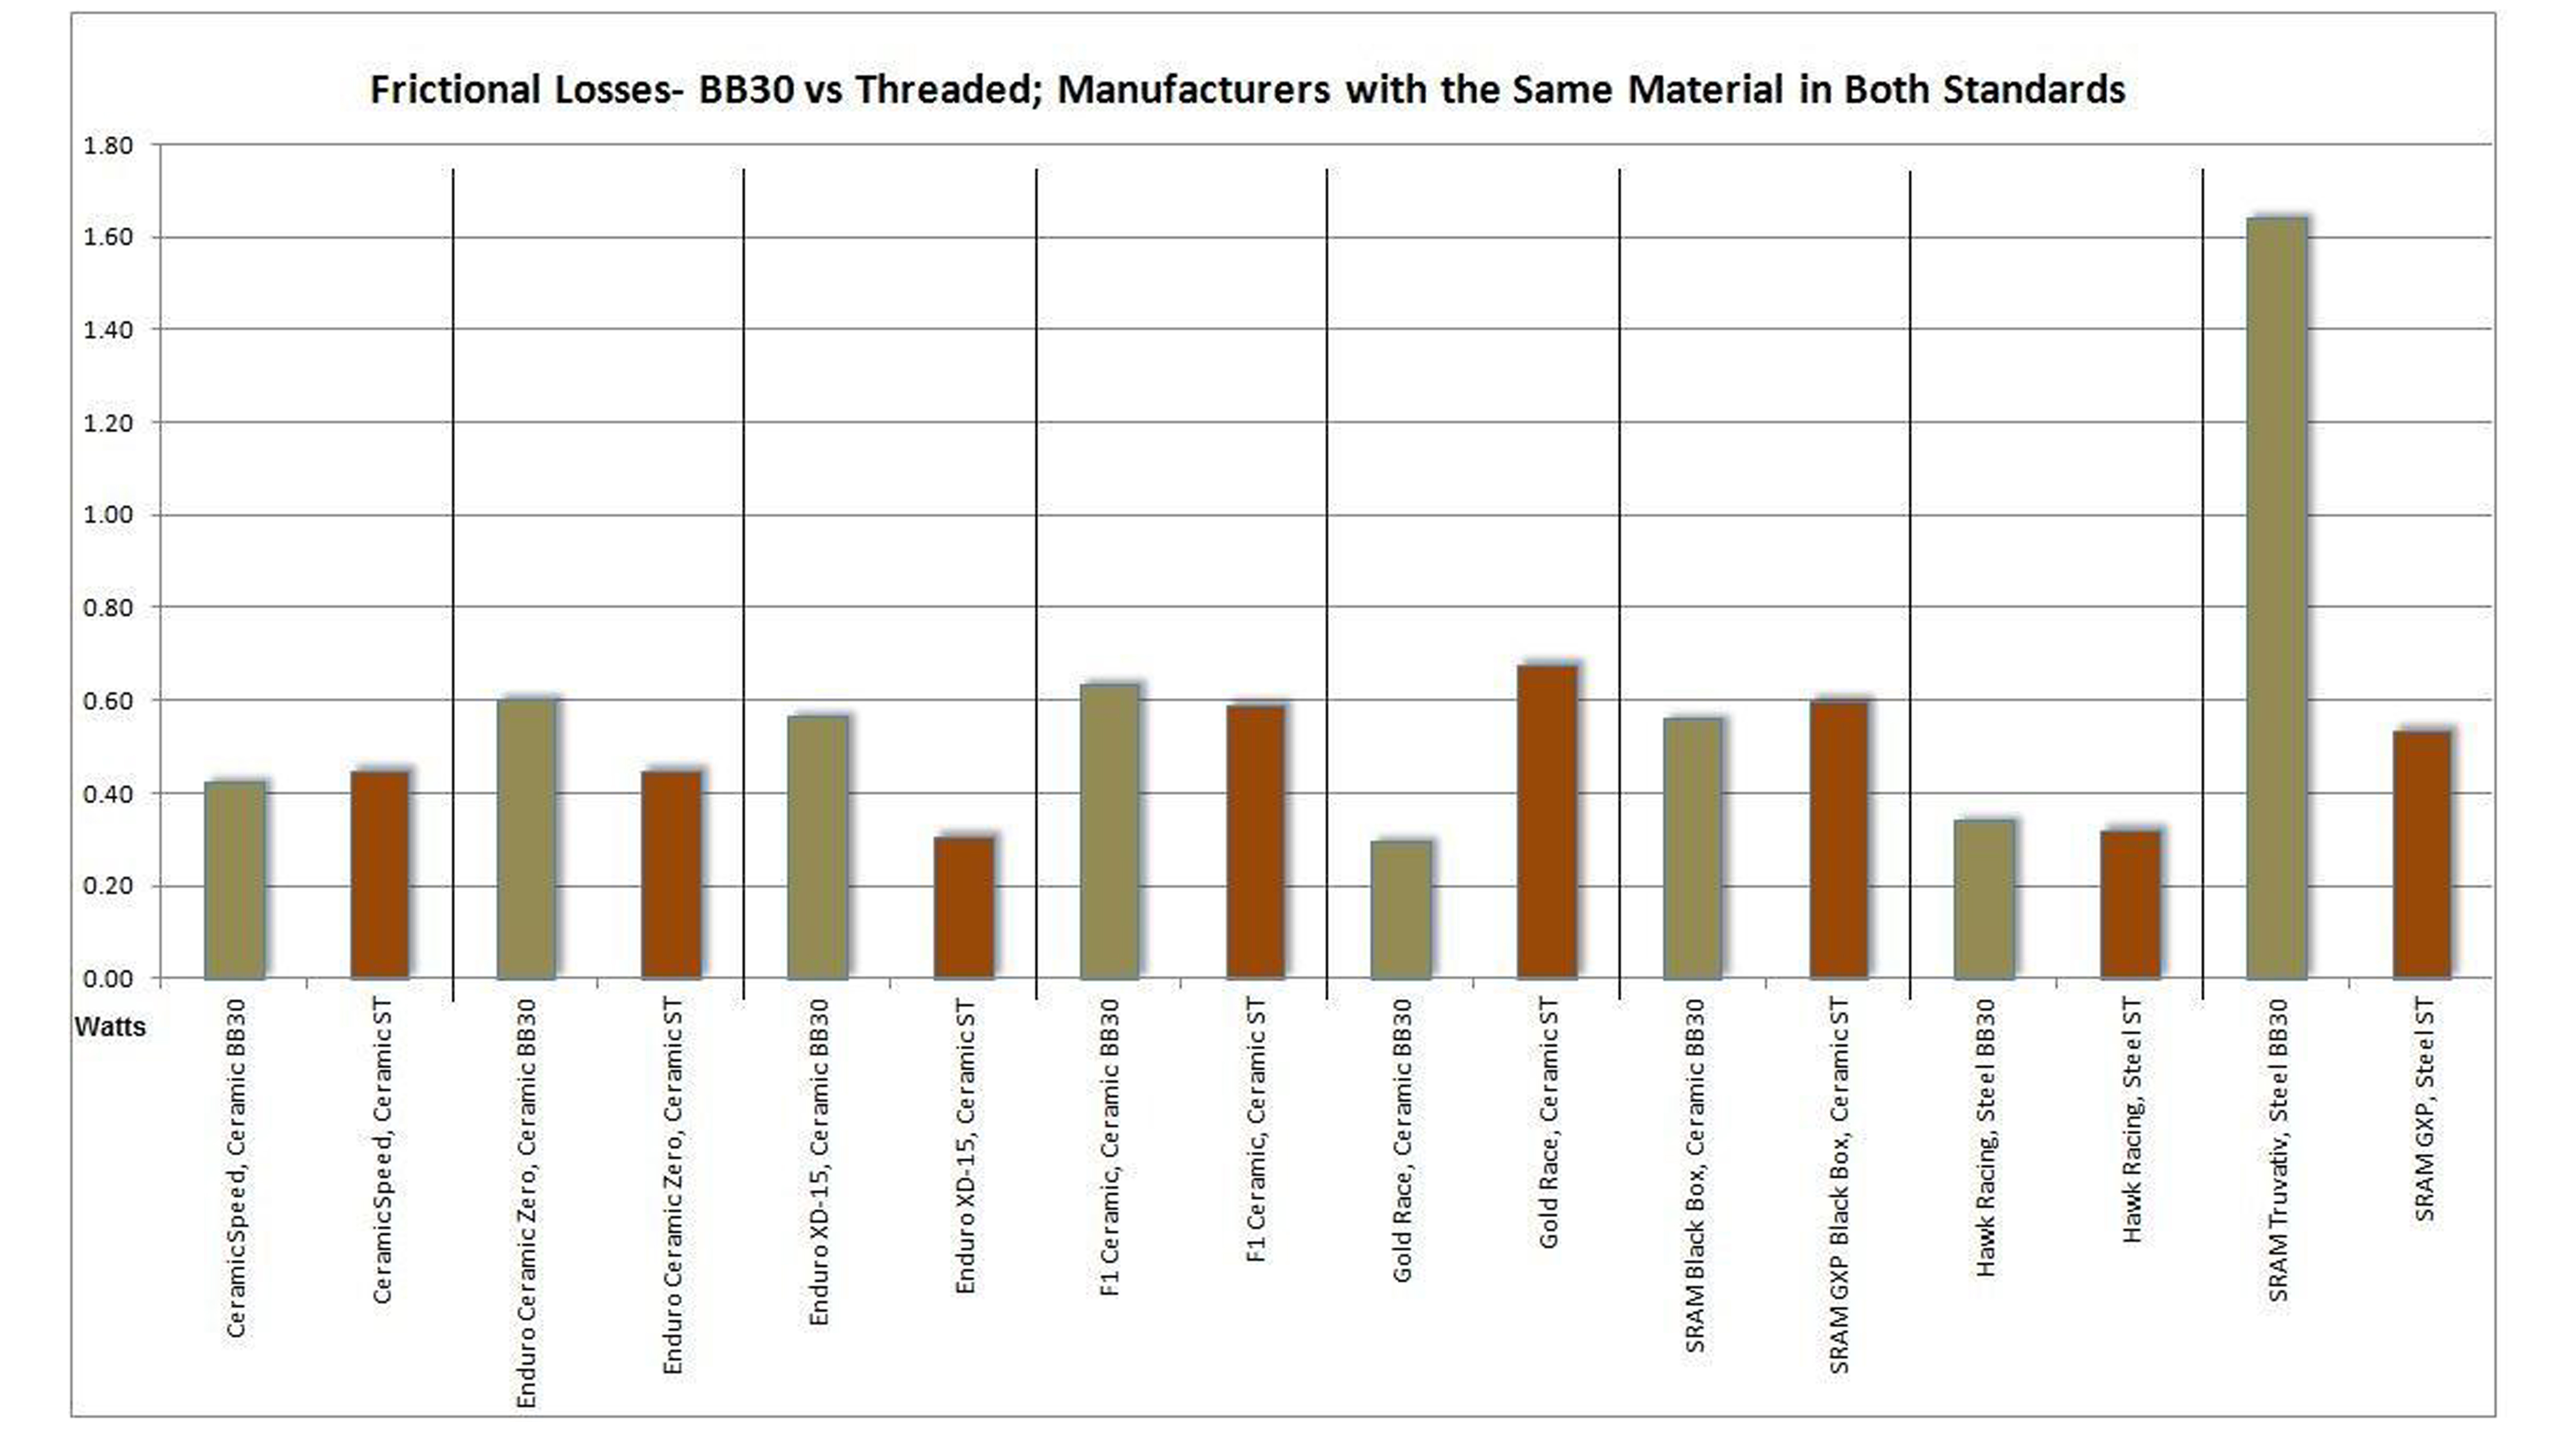 Frictional Losses - BB30 vs Threaded; Manufacturers with the Same Material in Both Standards